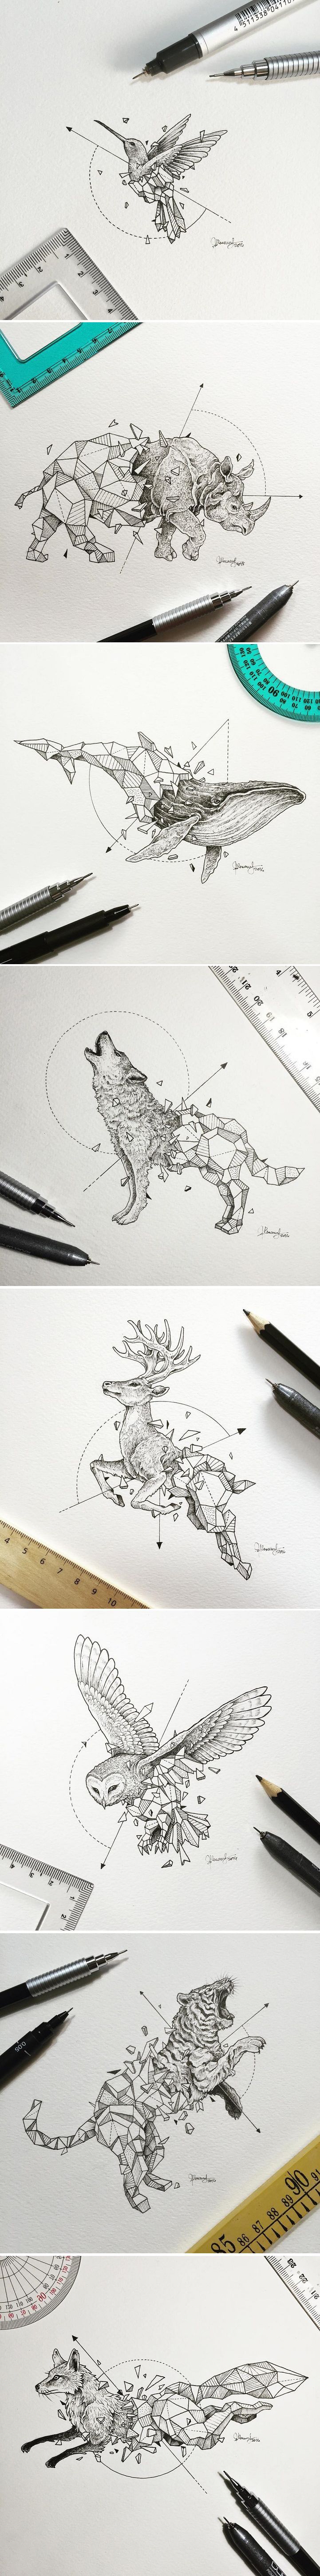 Manila-based illustrator Kerby Rosanes known as Sketchy Stories has created a new